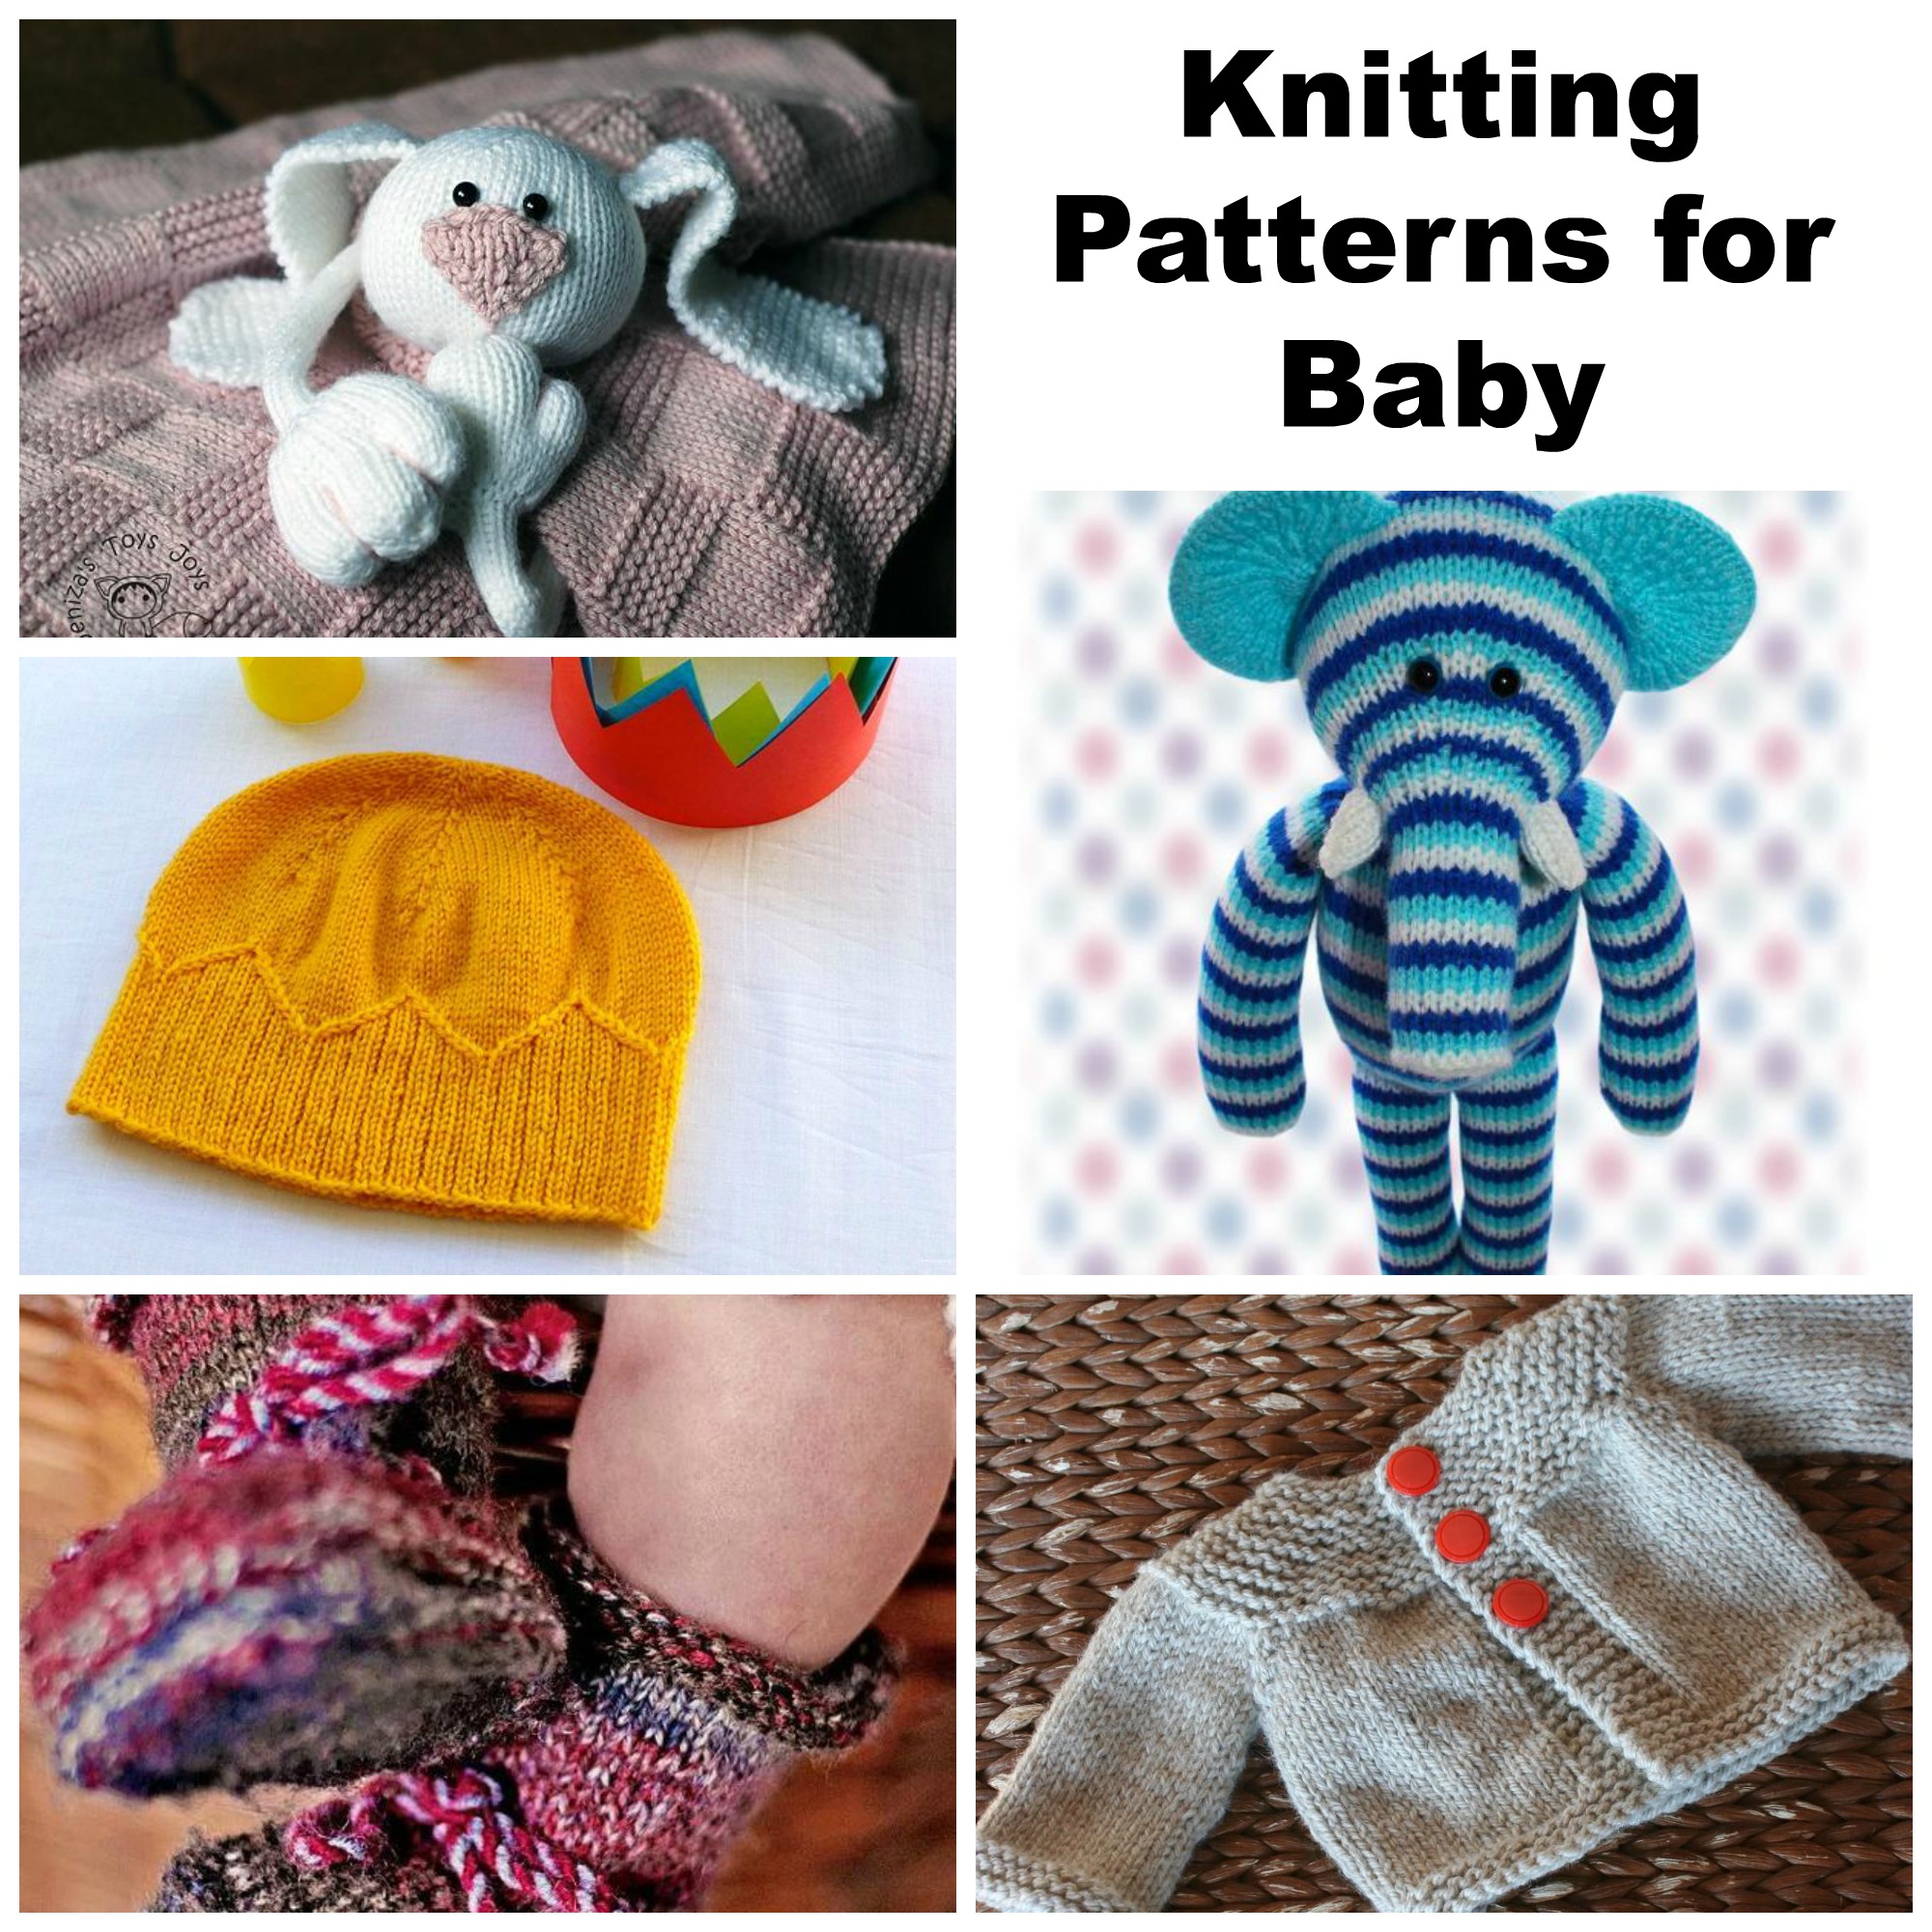 Knitting Patterns for Baby